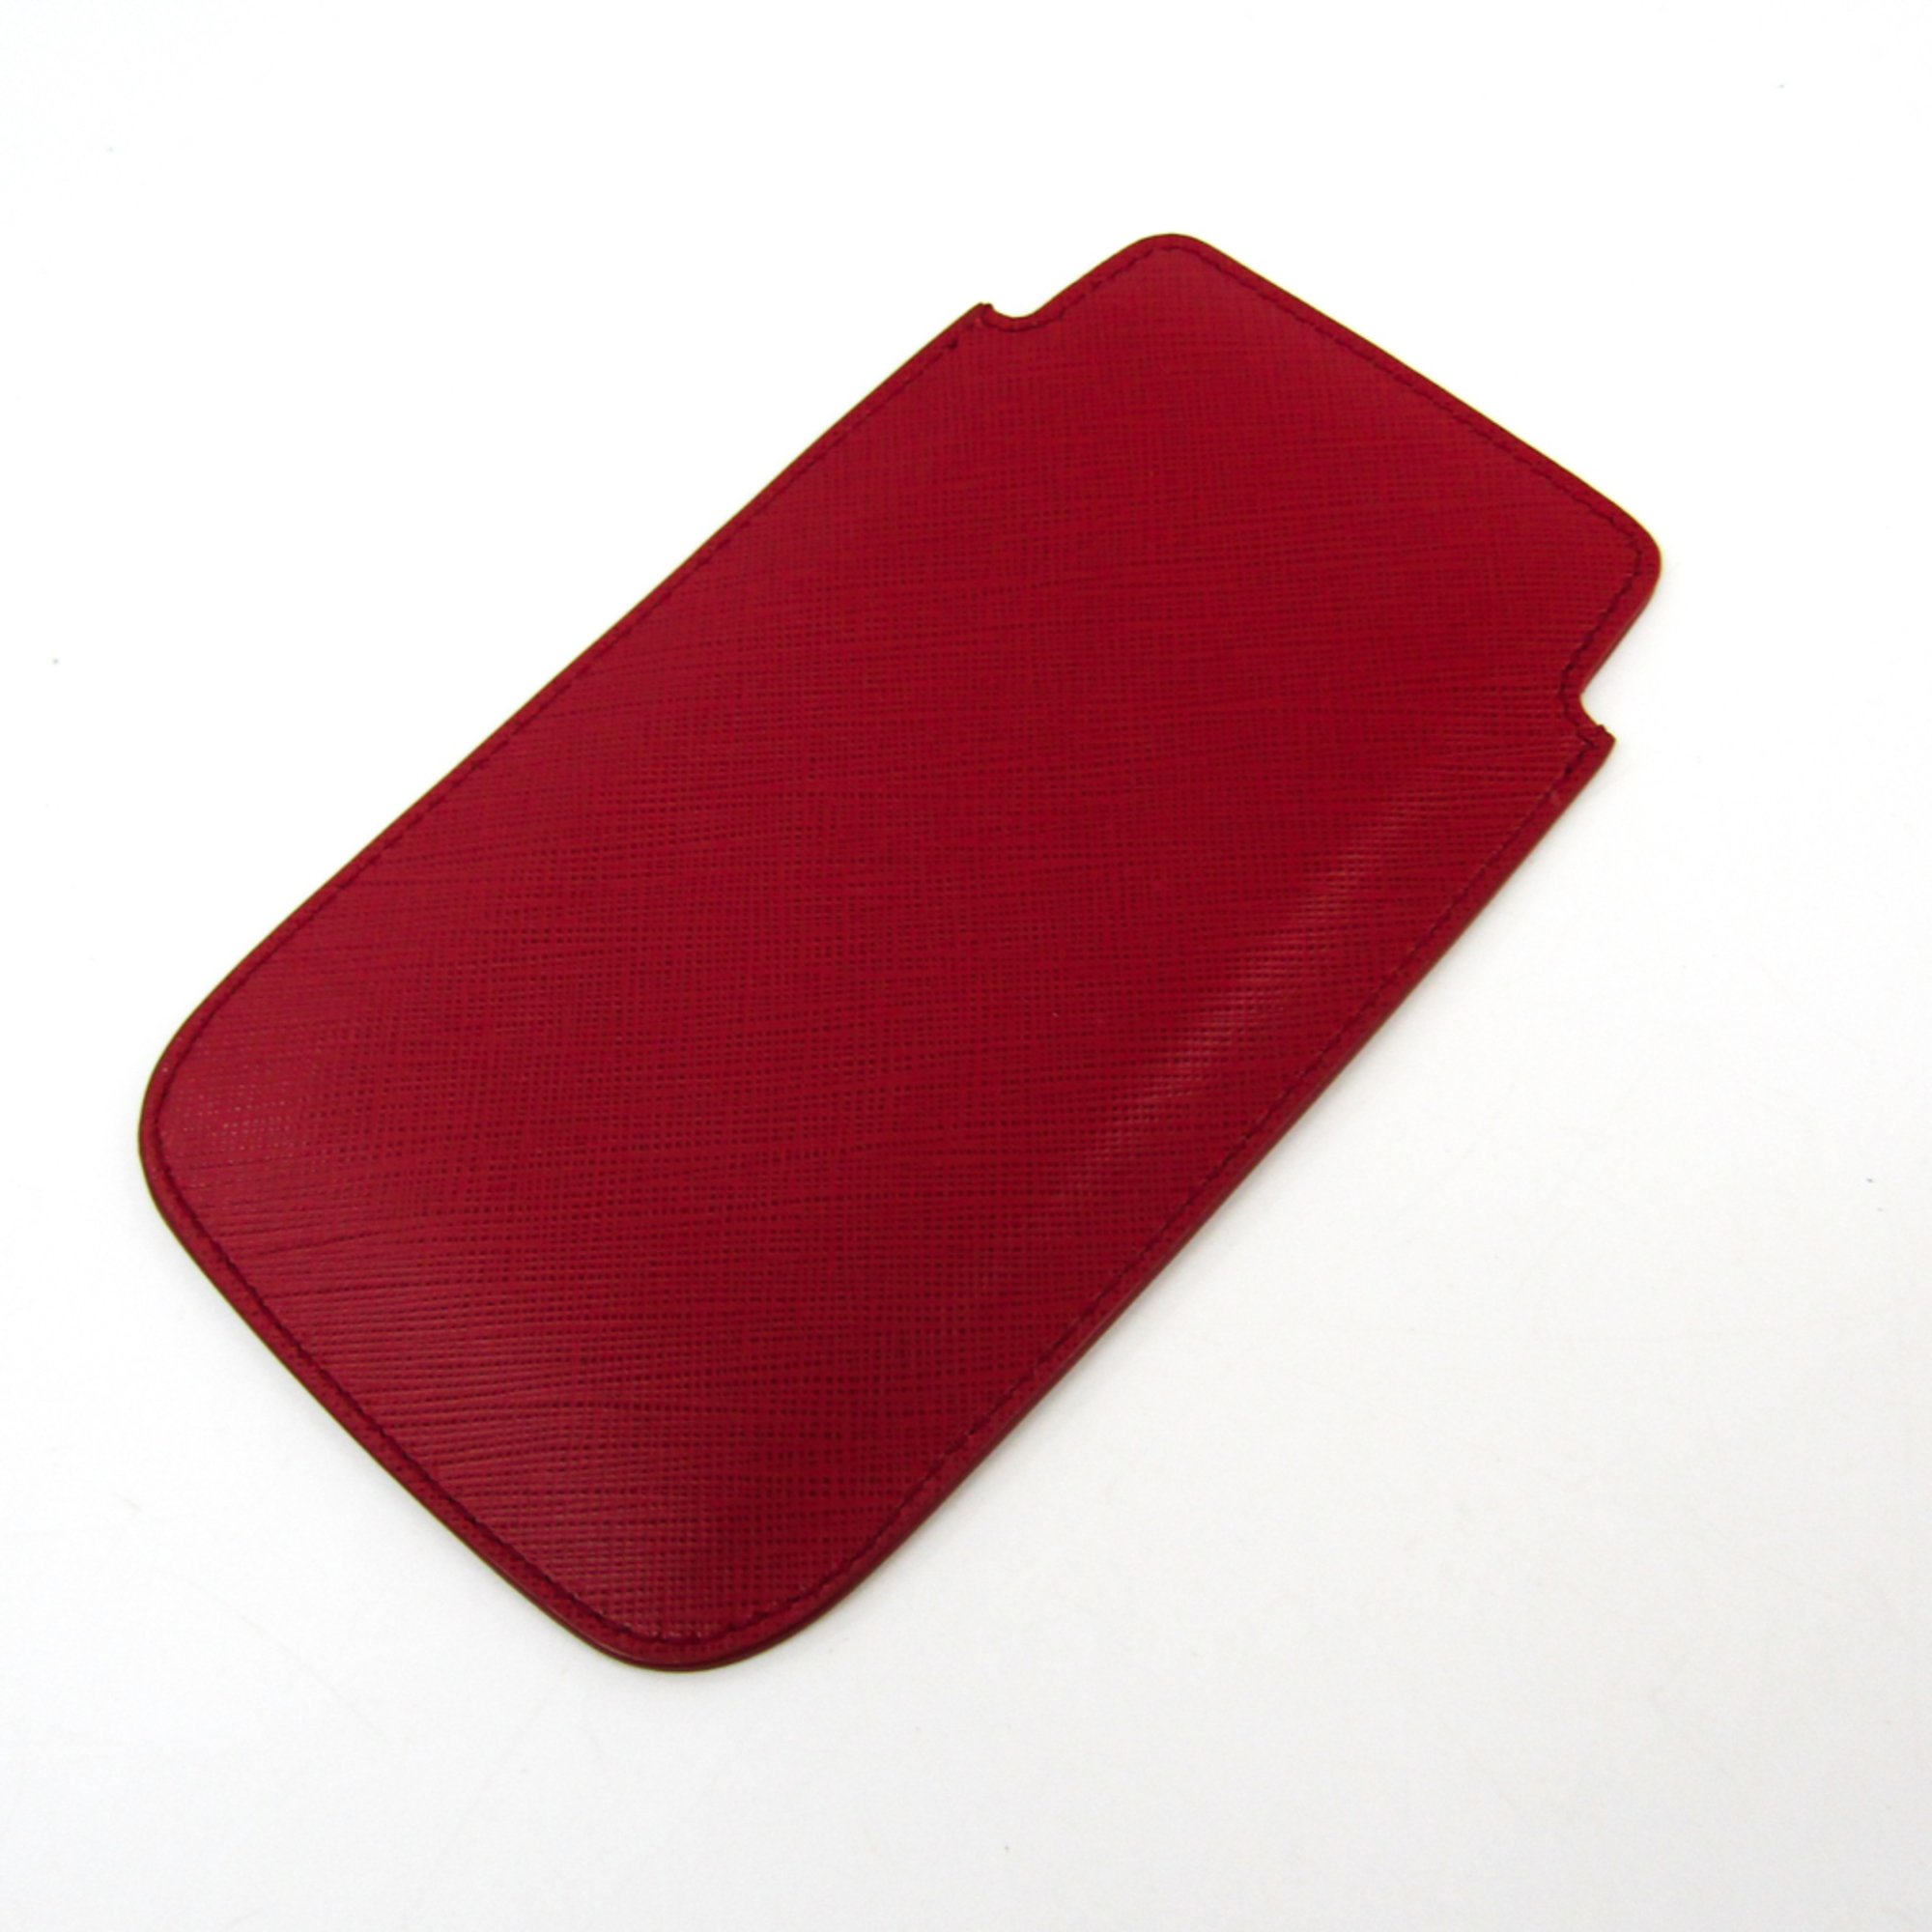 Salvatore Ferragamo Leather Phone Pouch/sleeve For IPhone 6 Plus Red 22 C430